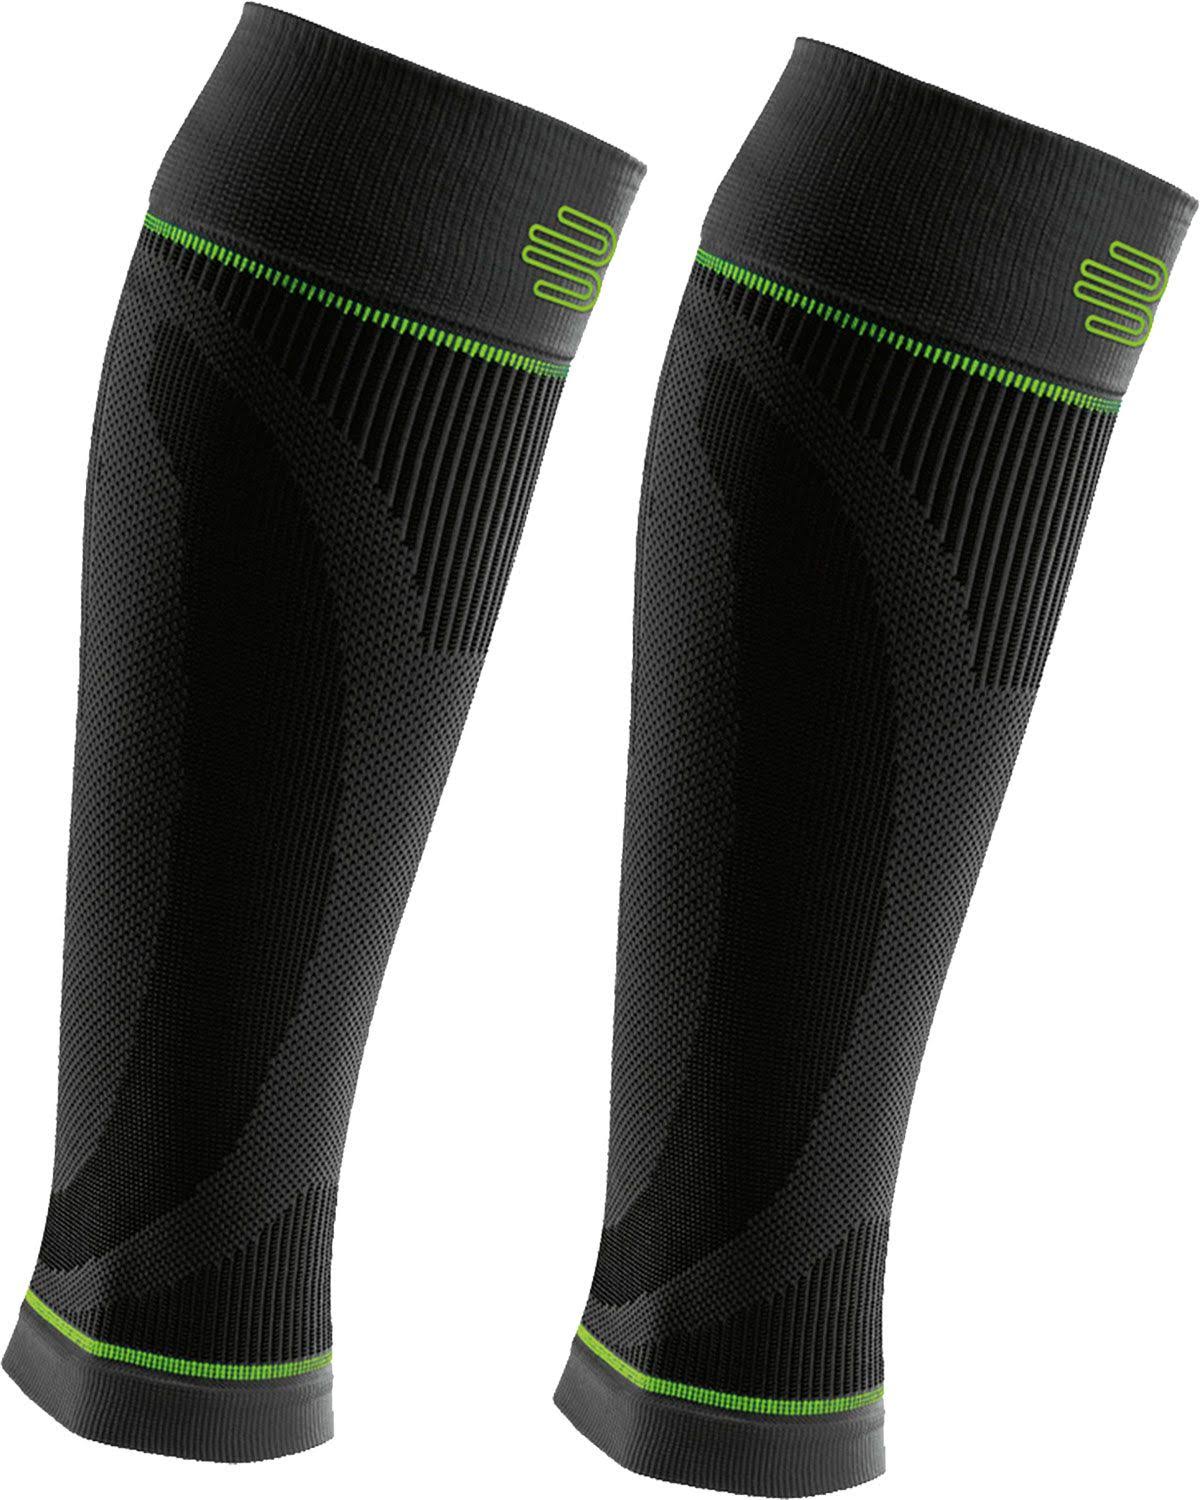 Bauerfeind Sports Compression Calf Sleeves, SEXTRA Long, Black - WGL-03